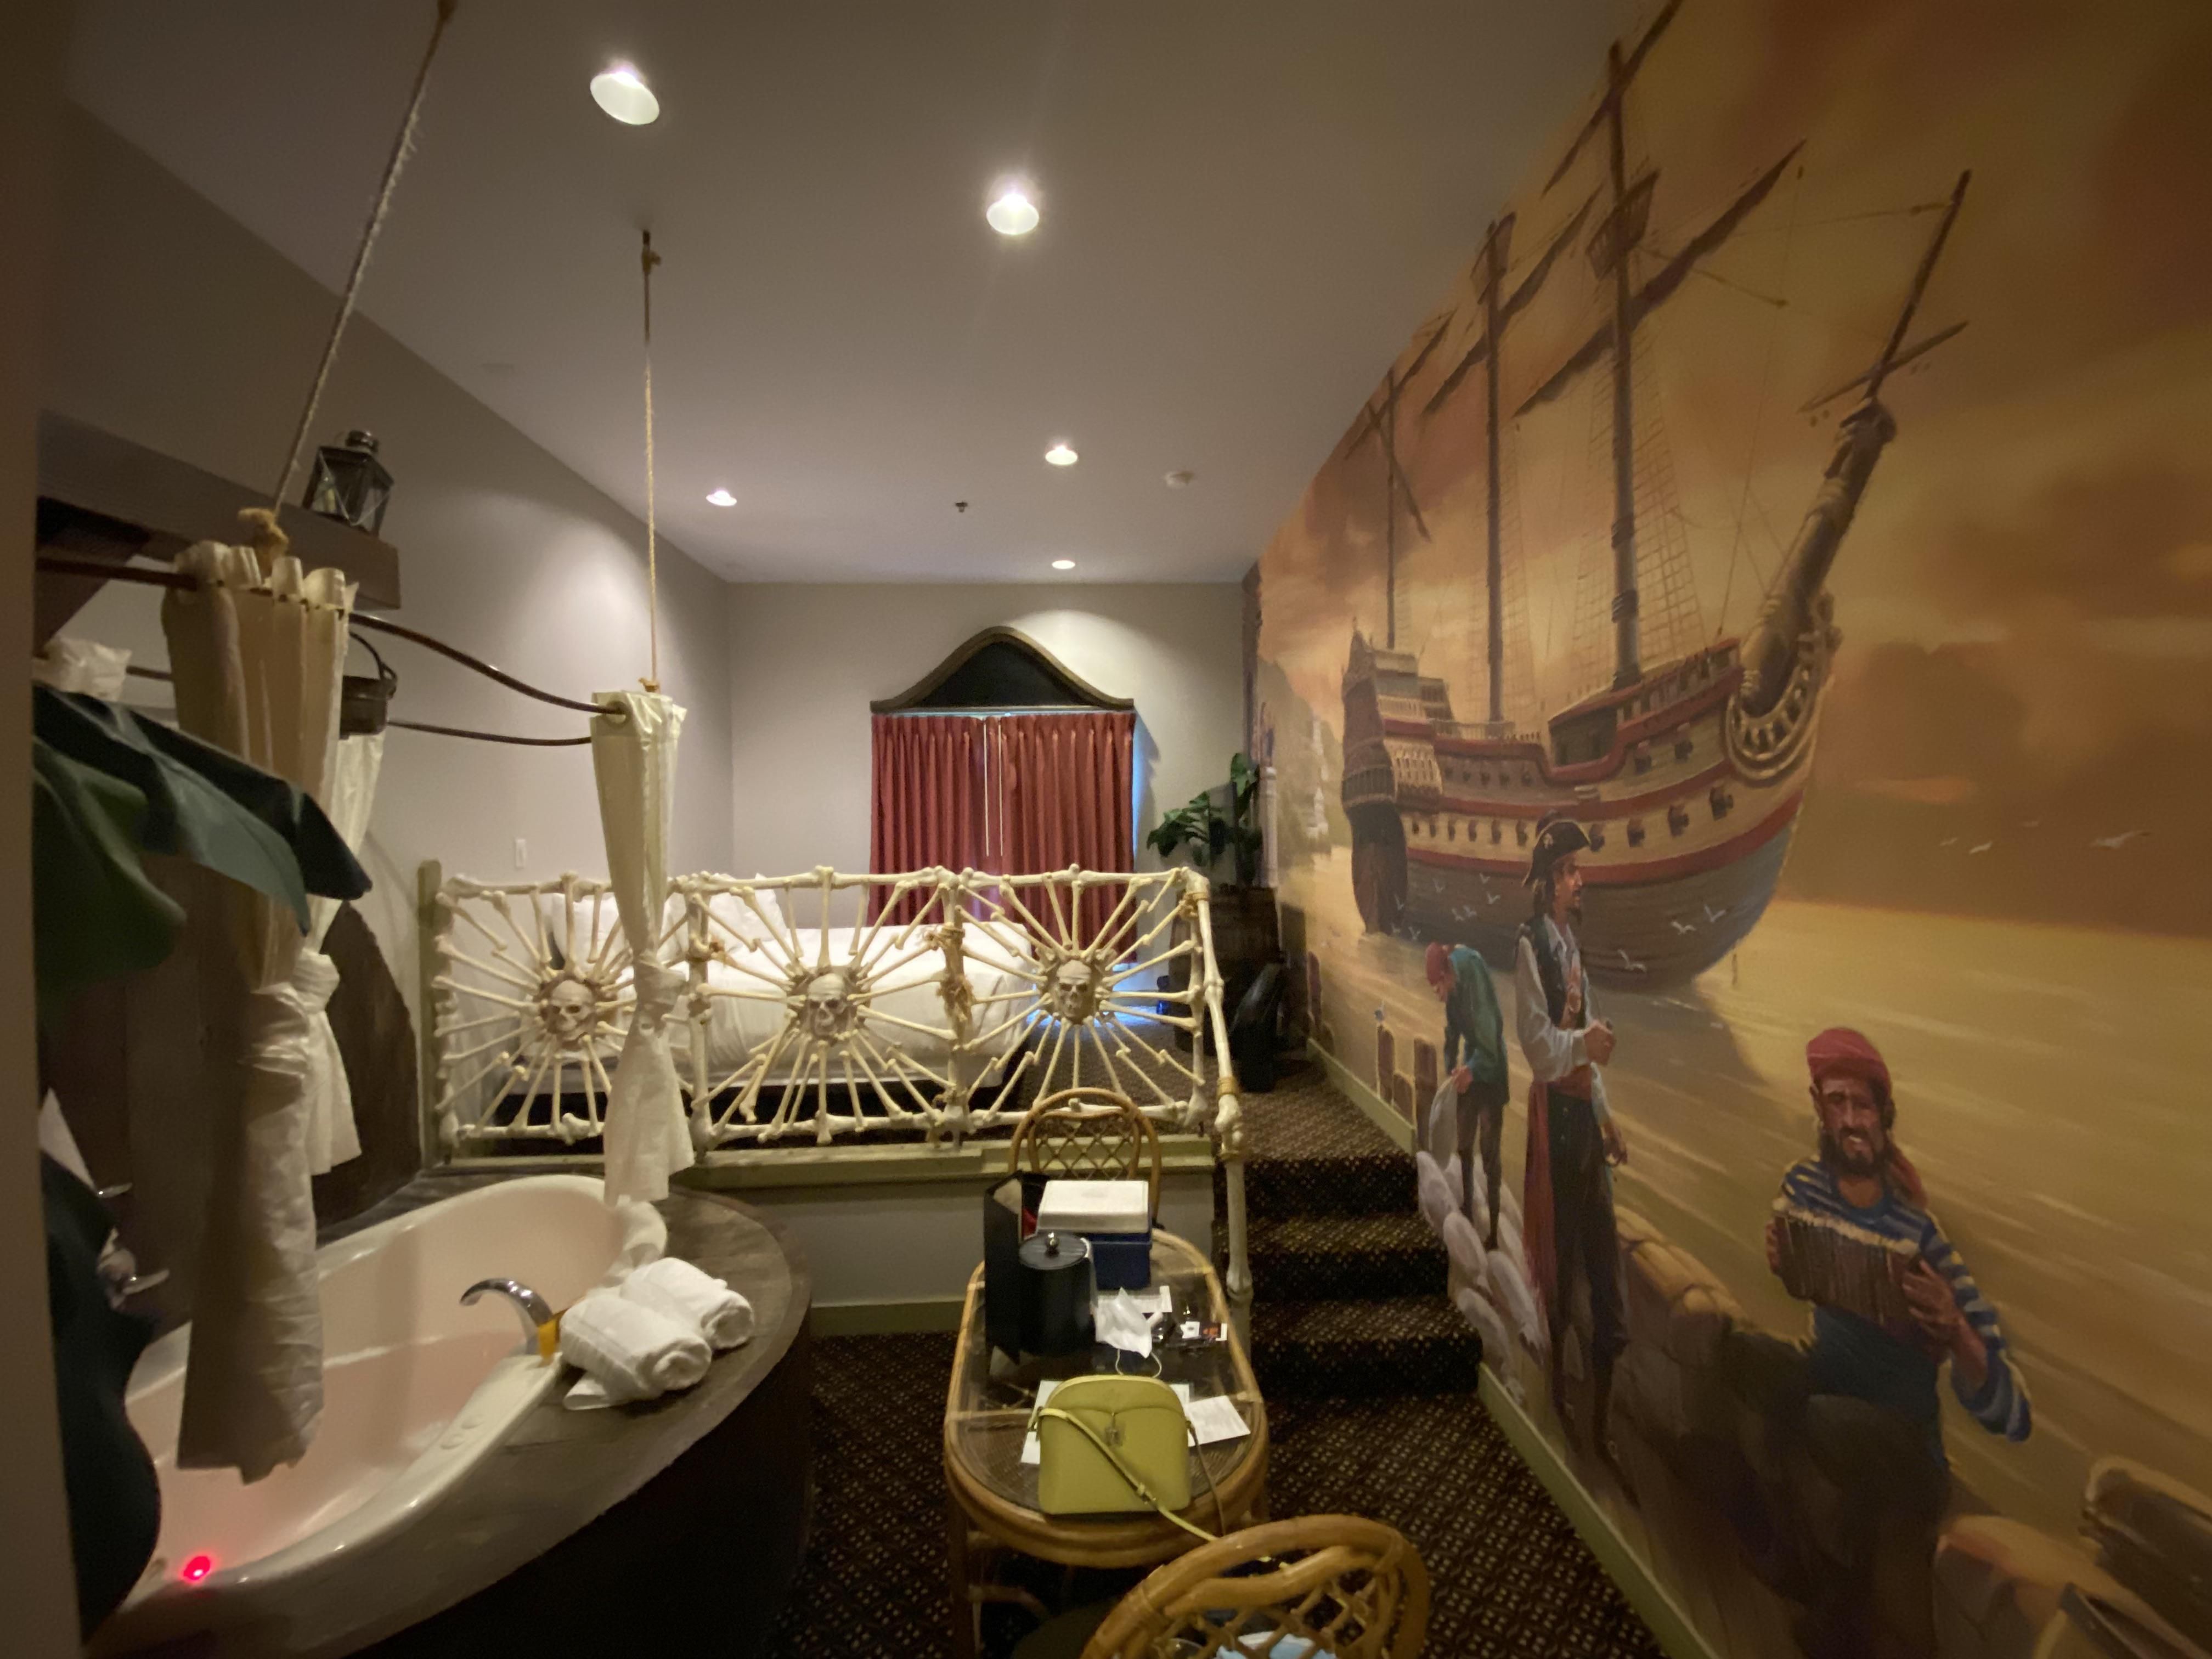 My wife recently booked us a pirate room to celebrate our anniversary…let’s hear those one liners.